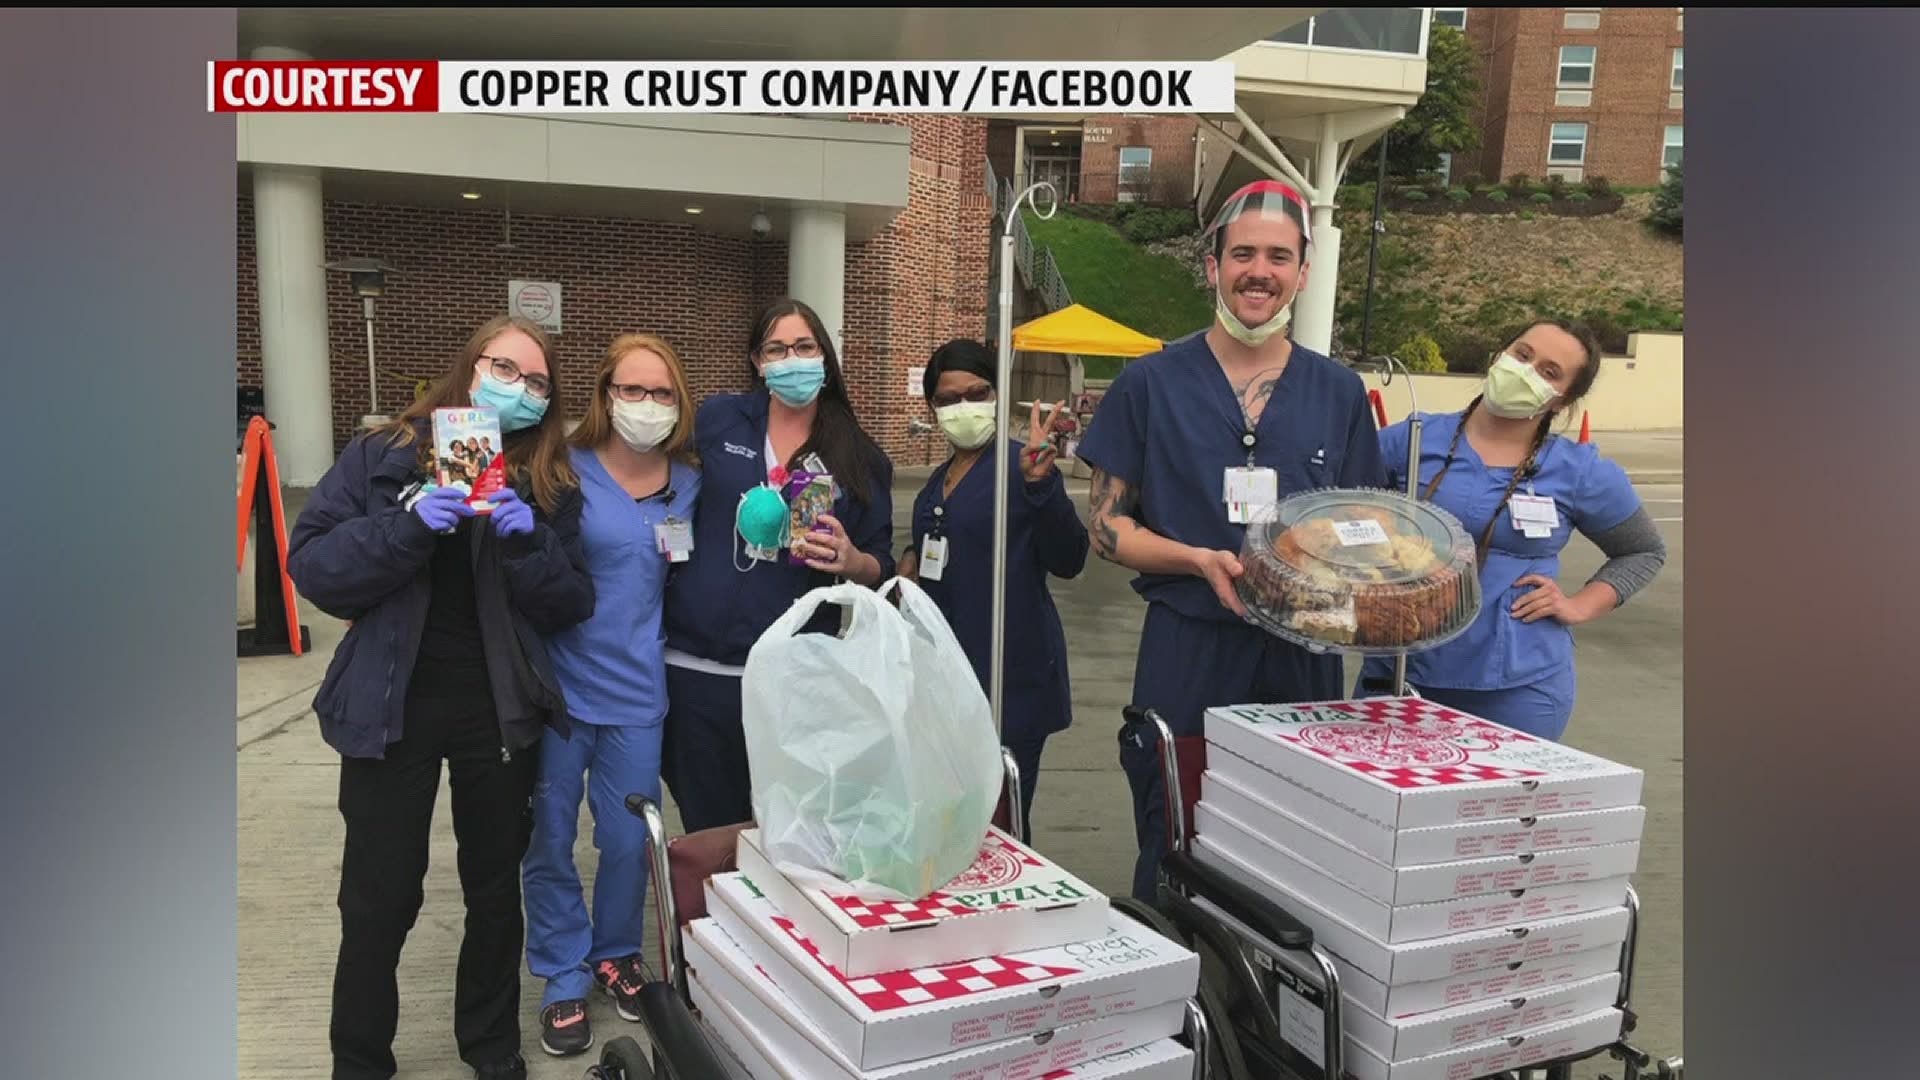 The Copper Crust Company is working hard to ensure the doctors, nurses and other staff have a slice of happiness to look forward to.